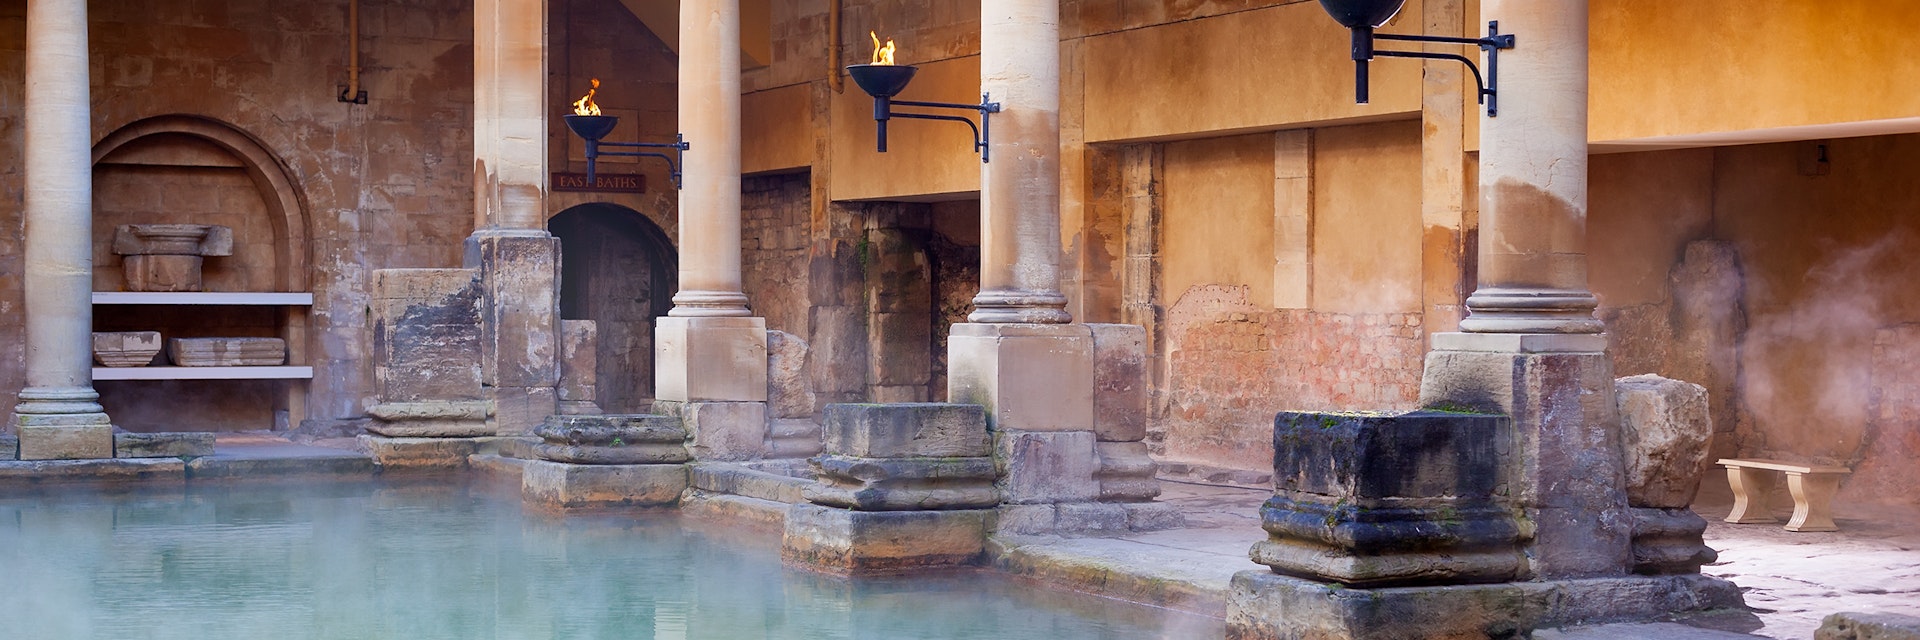 Steam rising off the hot  mineral water in the Great Bath, part of the Roman Baths in Bath, UK